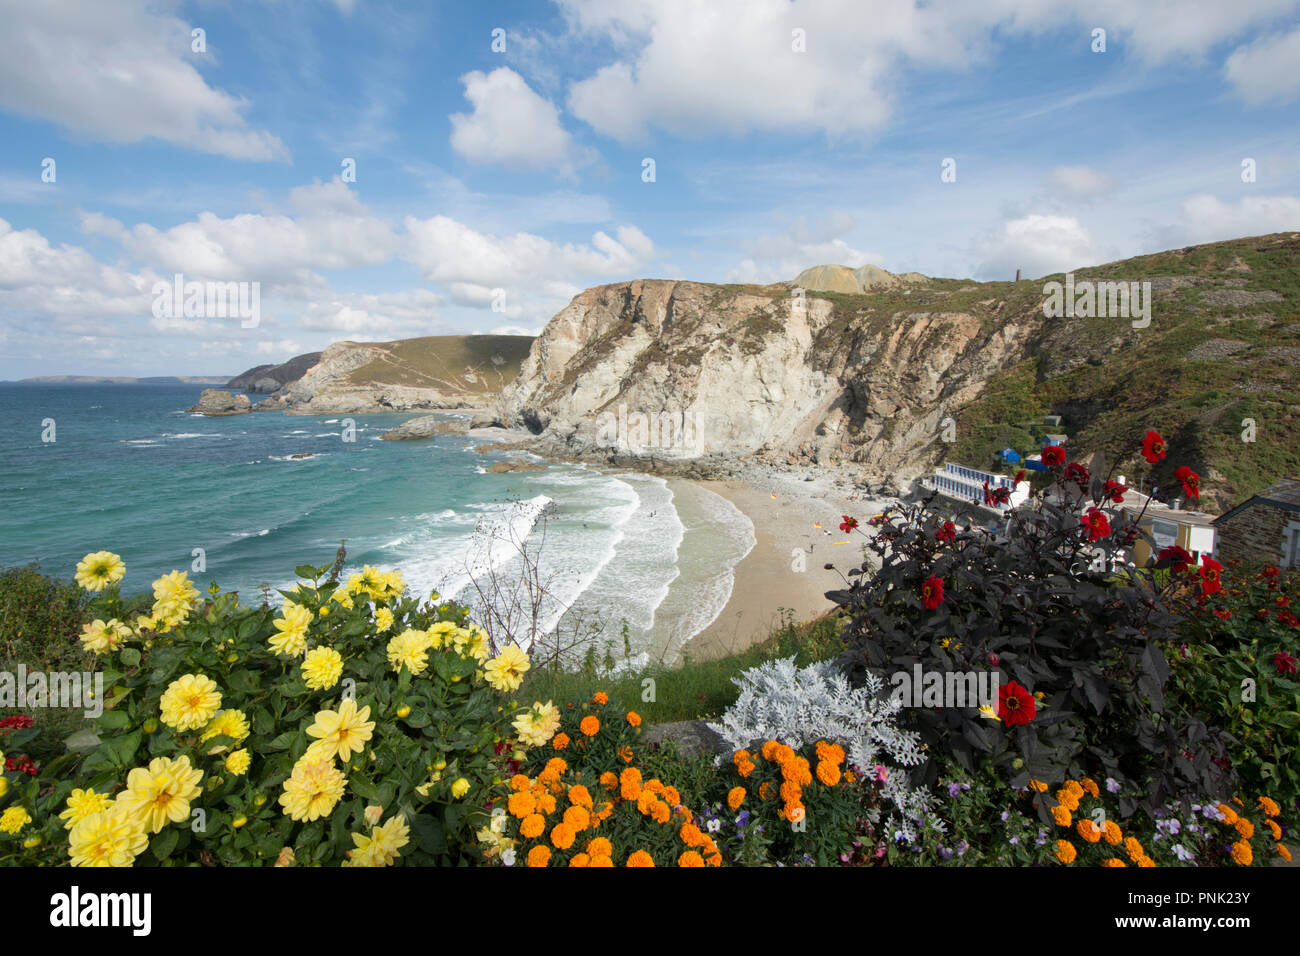 Trevaunance Cove, near St Agnes, Cornwall, UK, September, Surfing beach seen from cliff path, garden flowers in foreground. Stock Photo